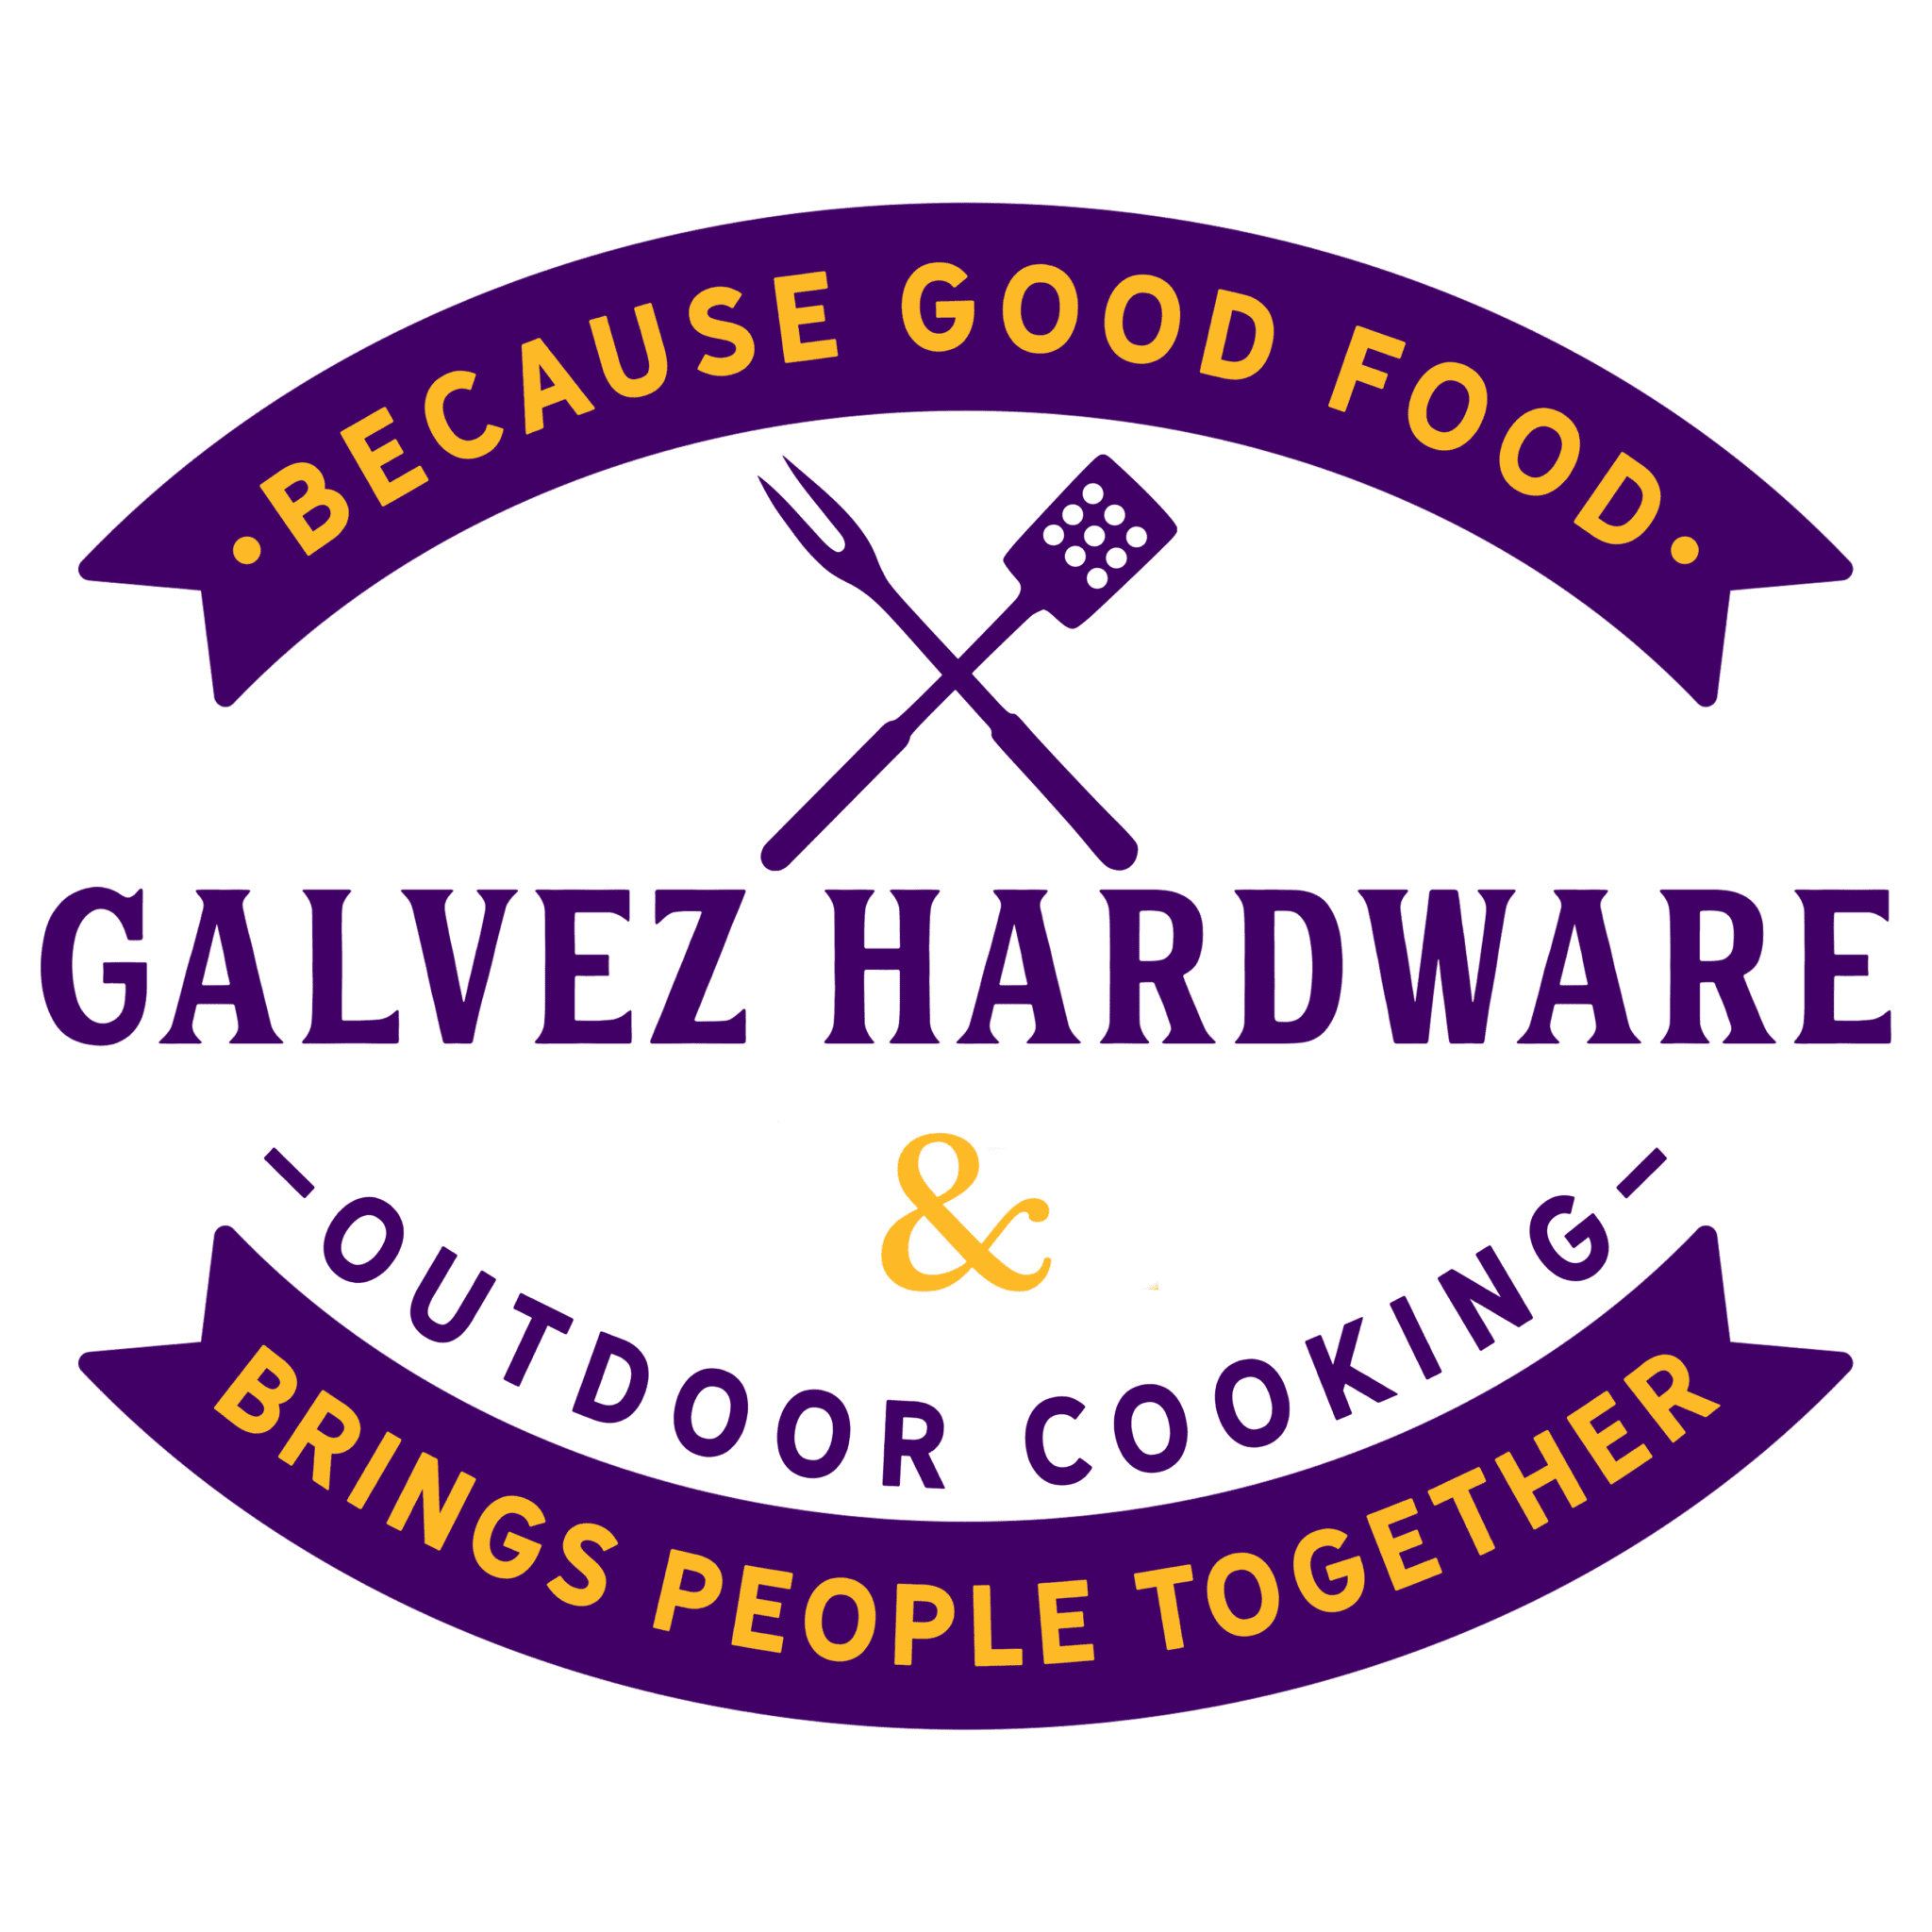 Galvez Hardware And Outdoor Cooking